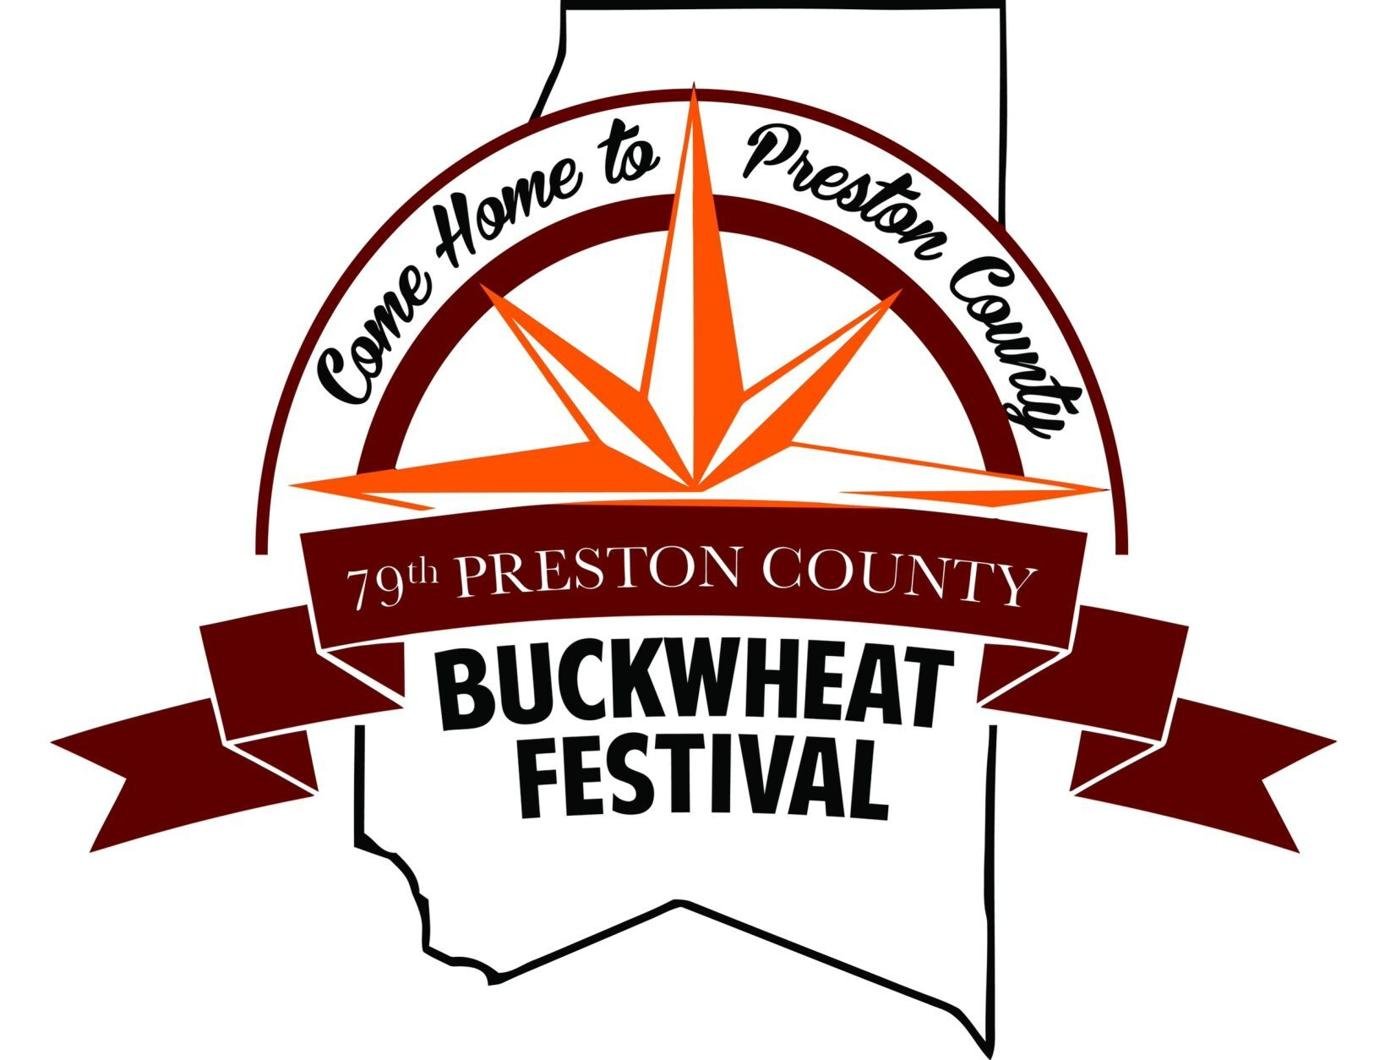 Buckwheat Festival committee looking at traffic patterns on fairgrounds